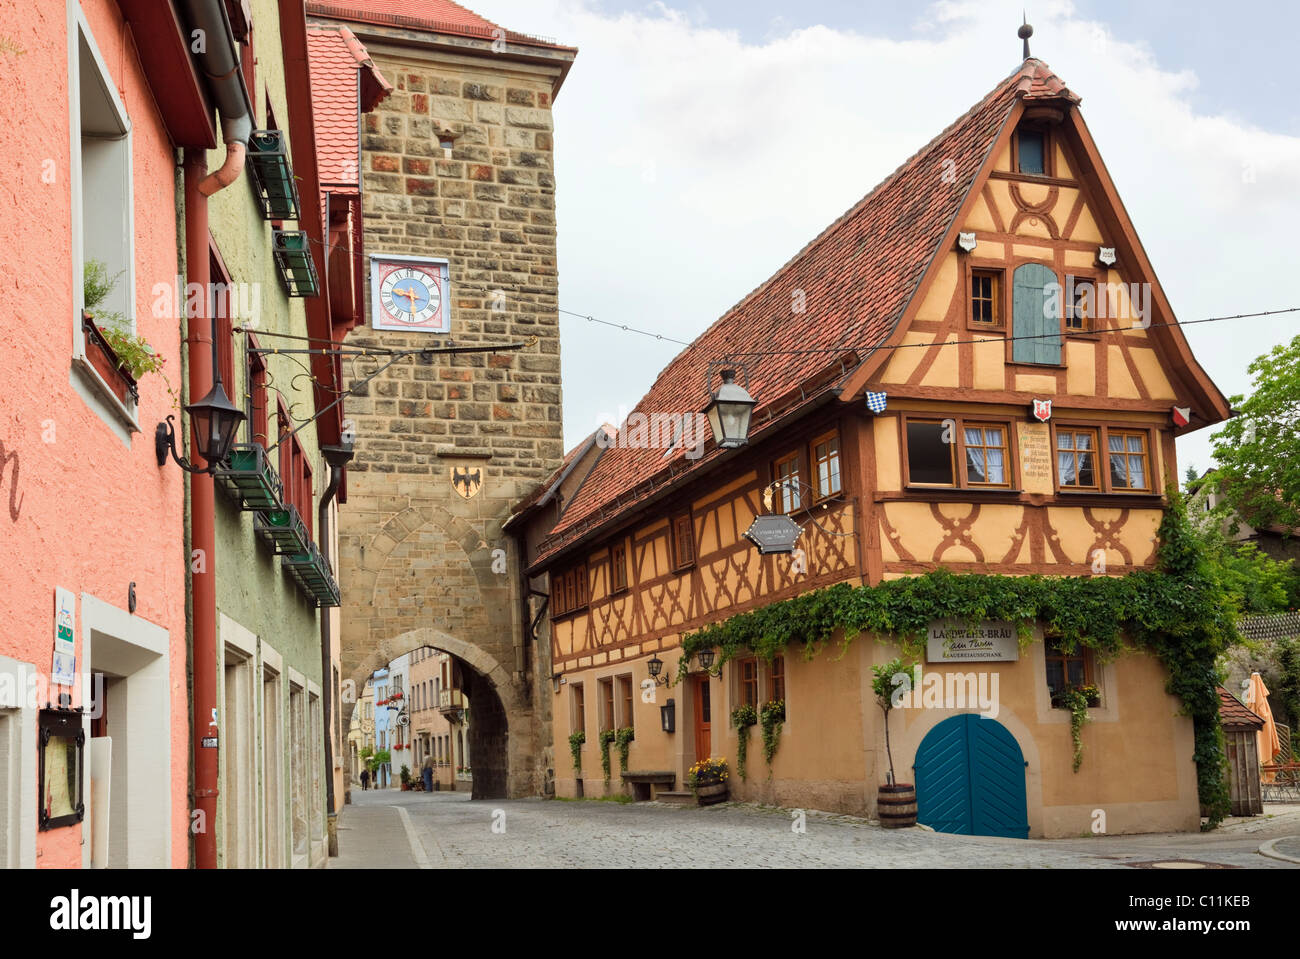 Half timbered building by 14th century Siebersturm Siebers Tower gate entrance to medieval old town on Romantic Road, Rothenburg Stock Photo